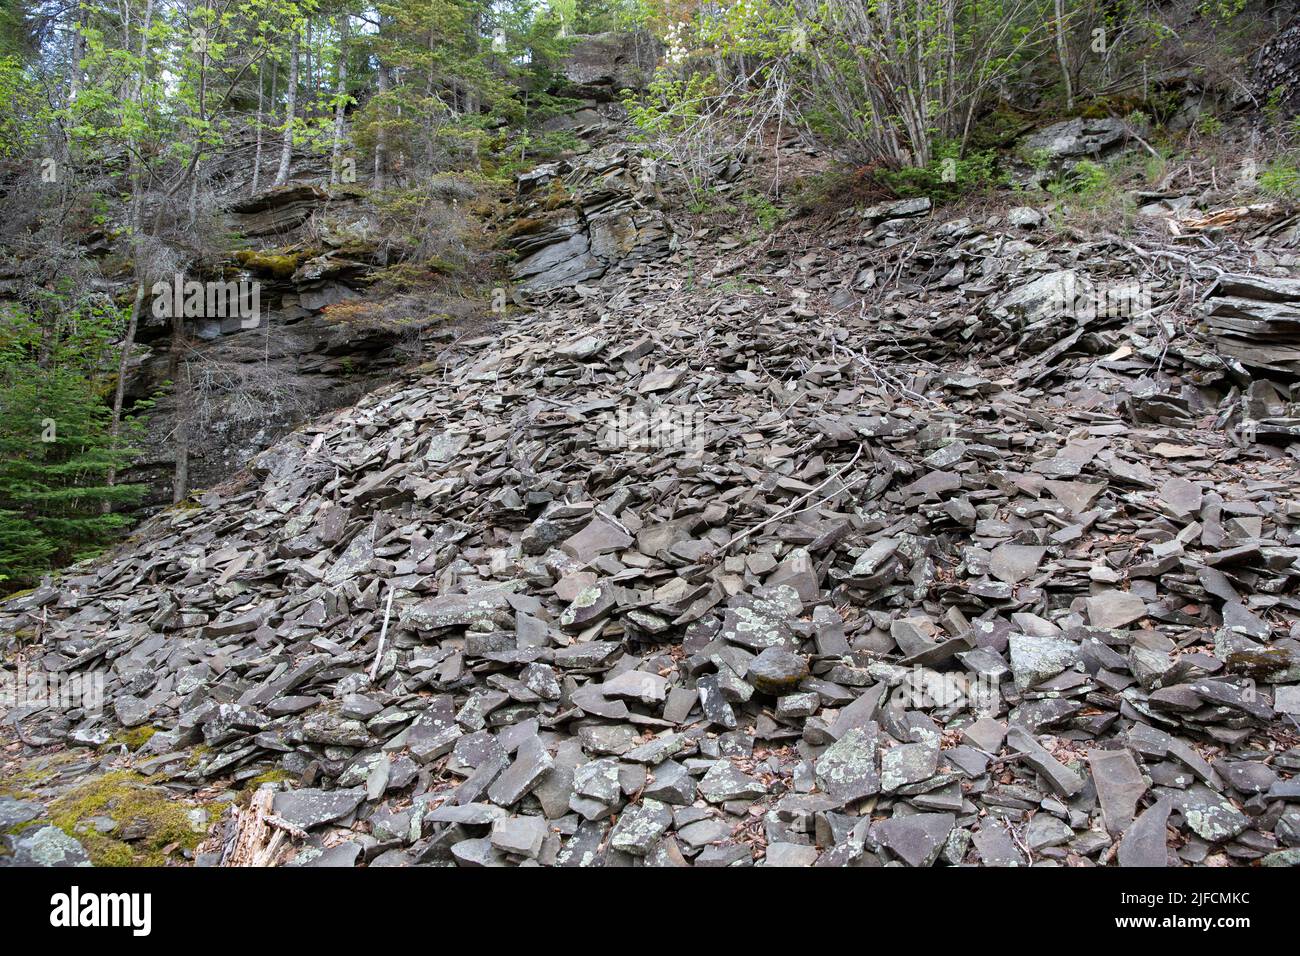 A rock slide of eroded shale and graywacke along a hiking trail on Mount Rose in the Grand Portage National Monument, Cook County, Minnesota, USA Stock Photo